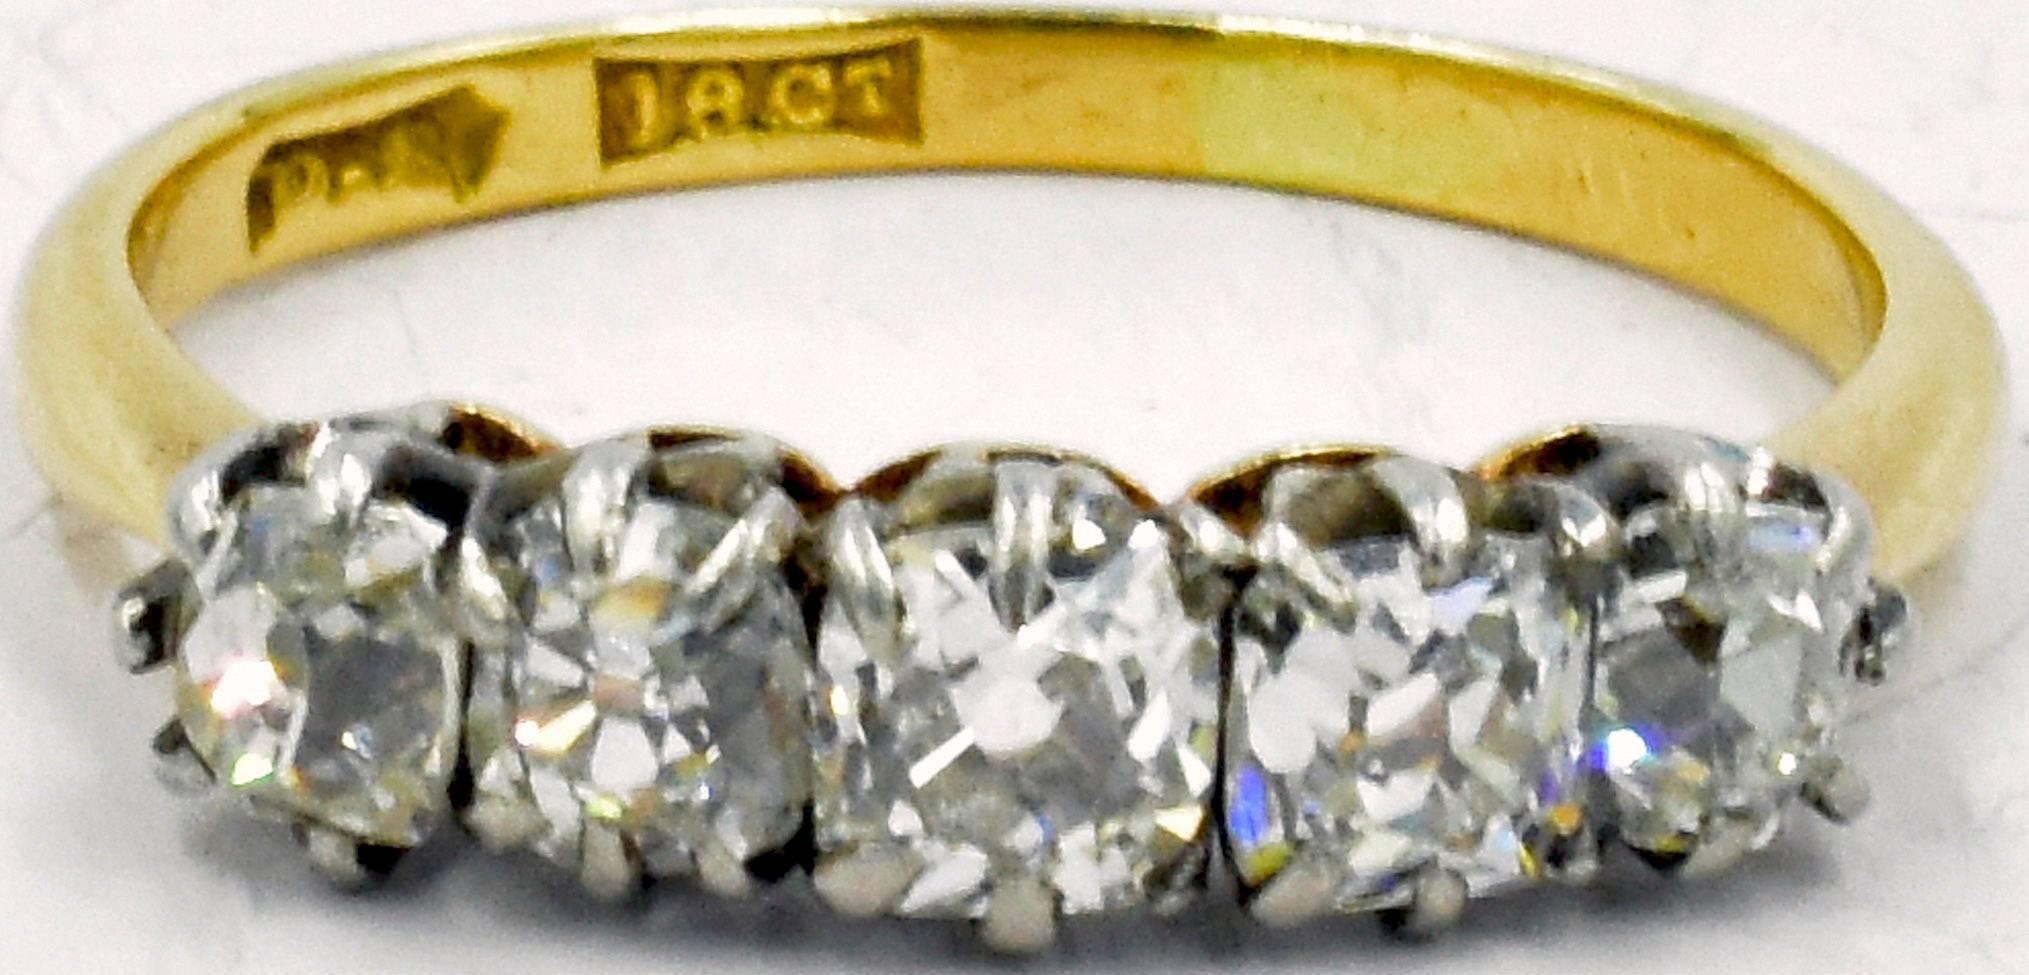 Wonderful 5 stone diamond ring dating to c. 1880 and set in 18K gold. The diamonds are old European cuts. The ring is a size 5 and measures 1/8" at its widest. The diamonds will sparkle on your finger and light up your life.